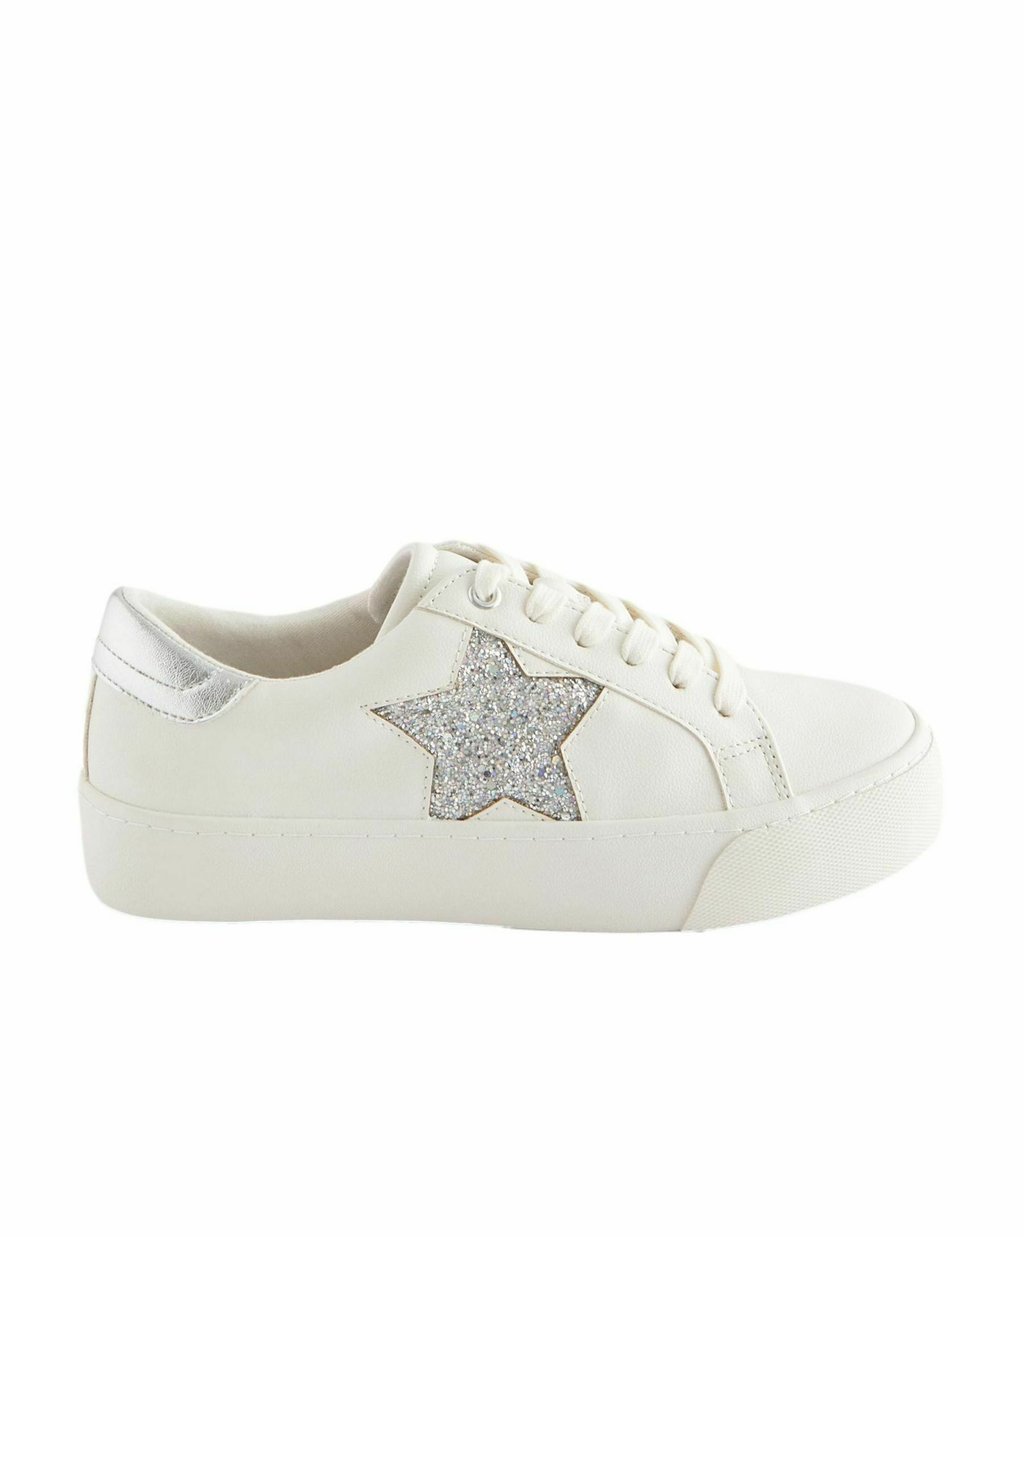 Низкие кроссовки Forever Comfort Chunky Star Regular Fit Next, цвет white silver кроссовки next forever comfort star embroidered white